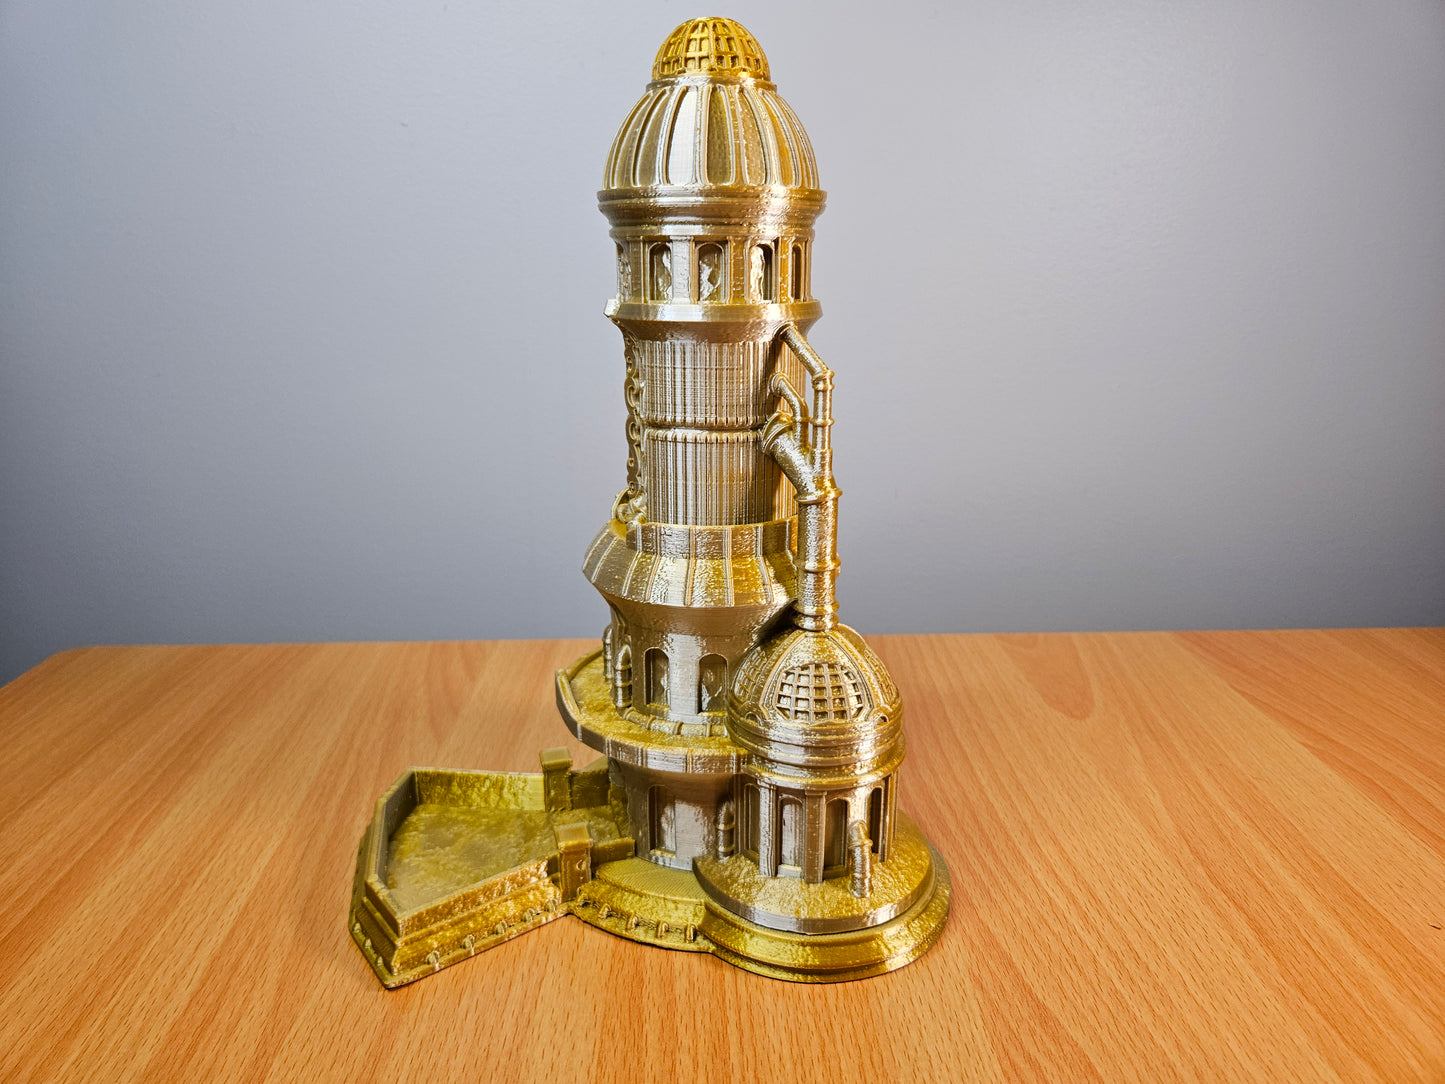 Steampunk Dice Tower by Mythic Roll